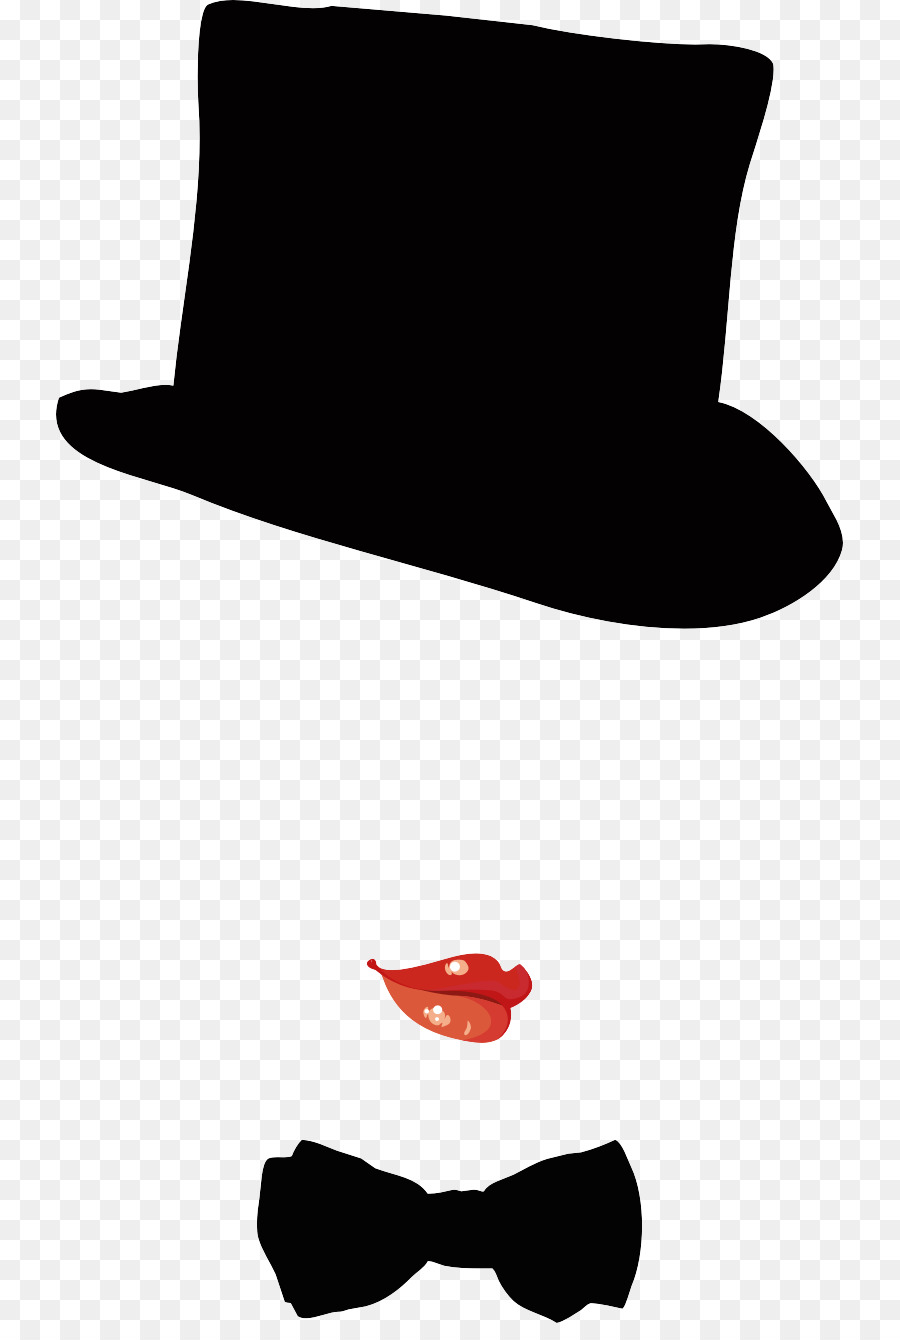 Fedora Hat Sombrero Silhouette - Hat, people, hat, silhouette png download - 787*1323 - Free Transparent Fedora png Download.